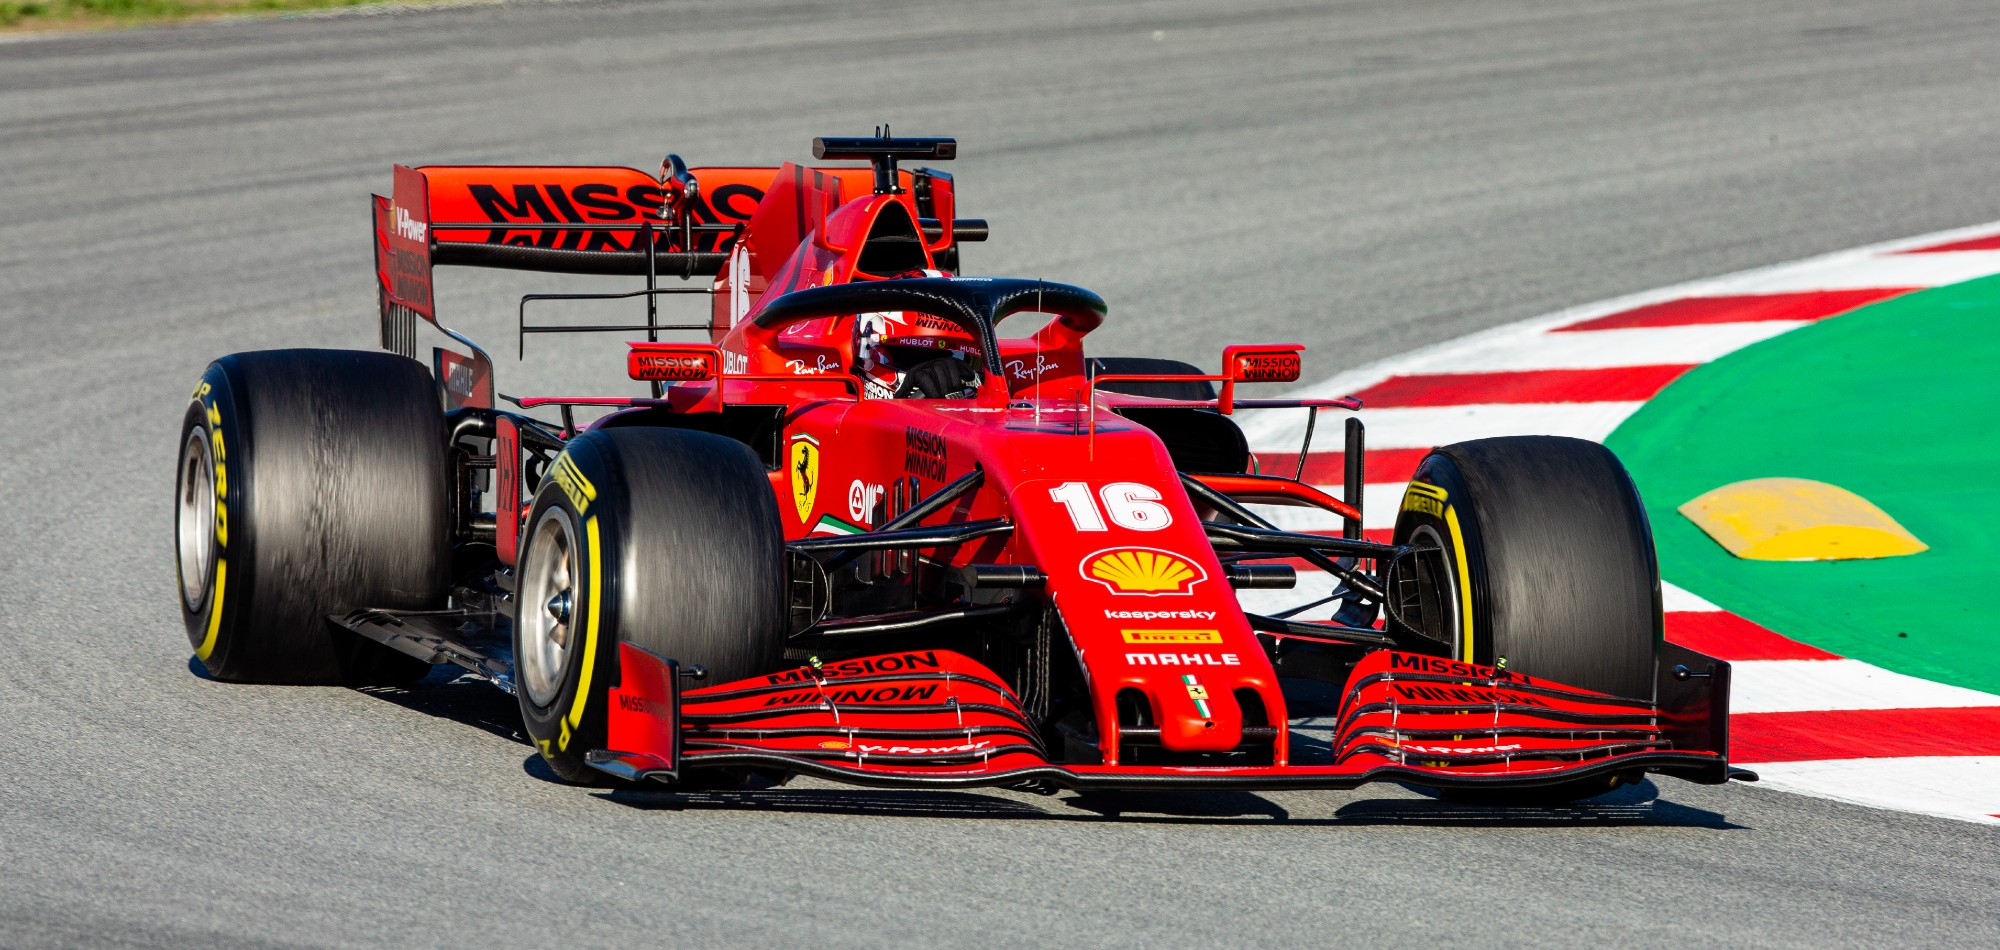 Leclerc on top in Spain practice as Mercedes show signs of life